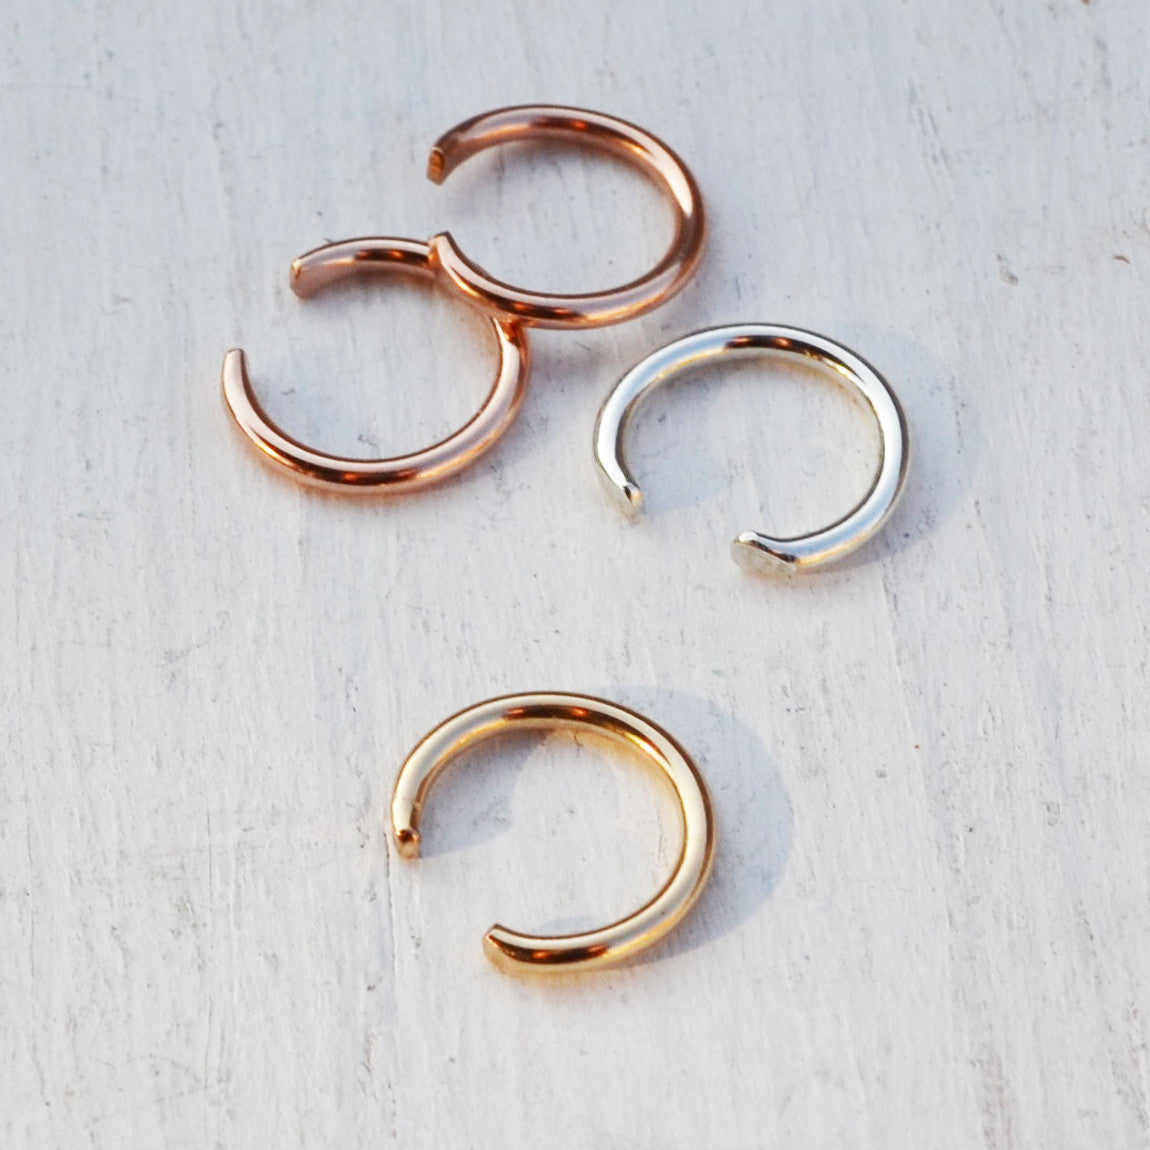 Simple Ear Cuff, Gold, Rose Gold, or Silver